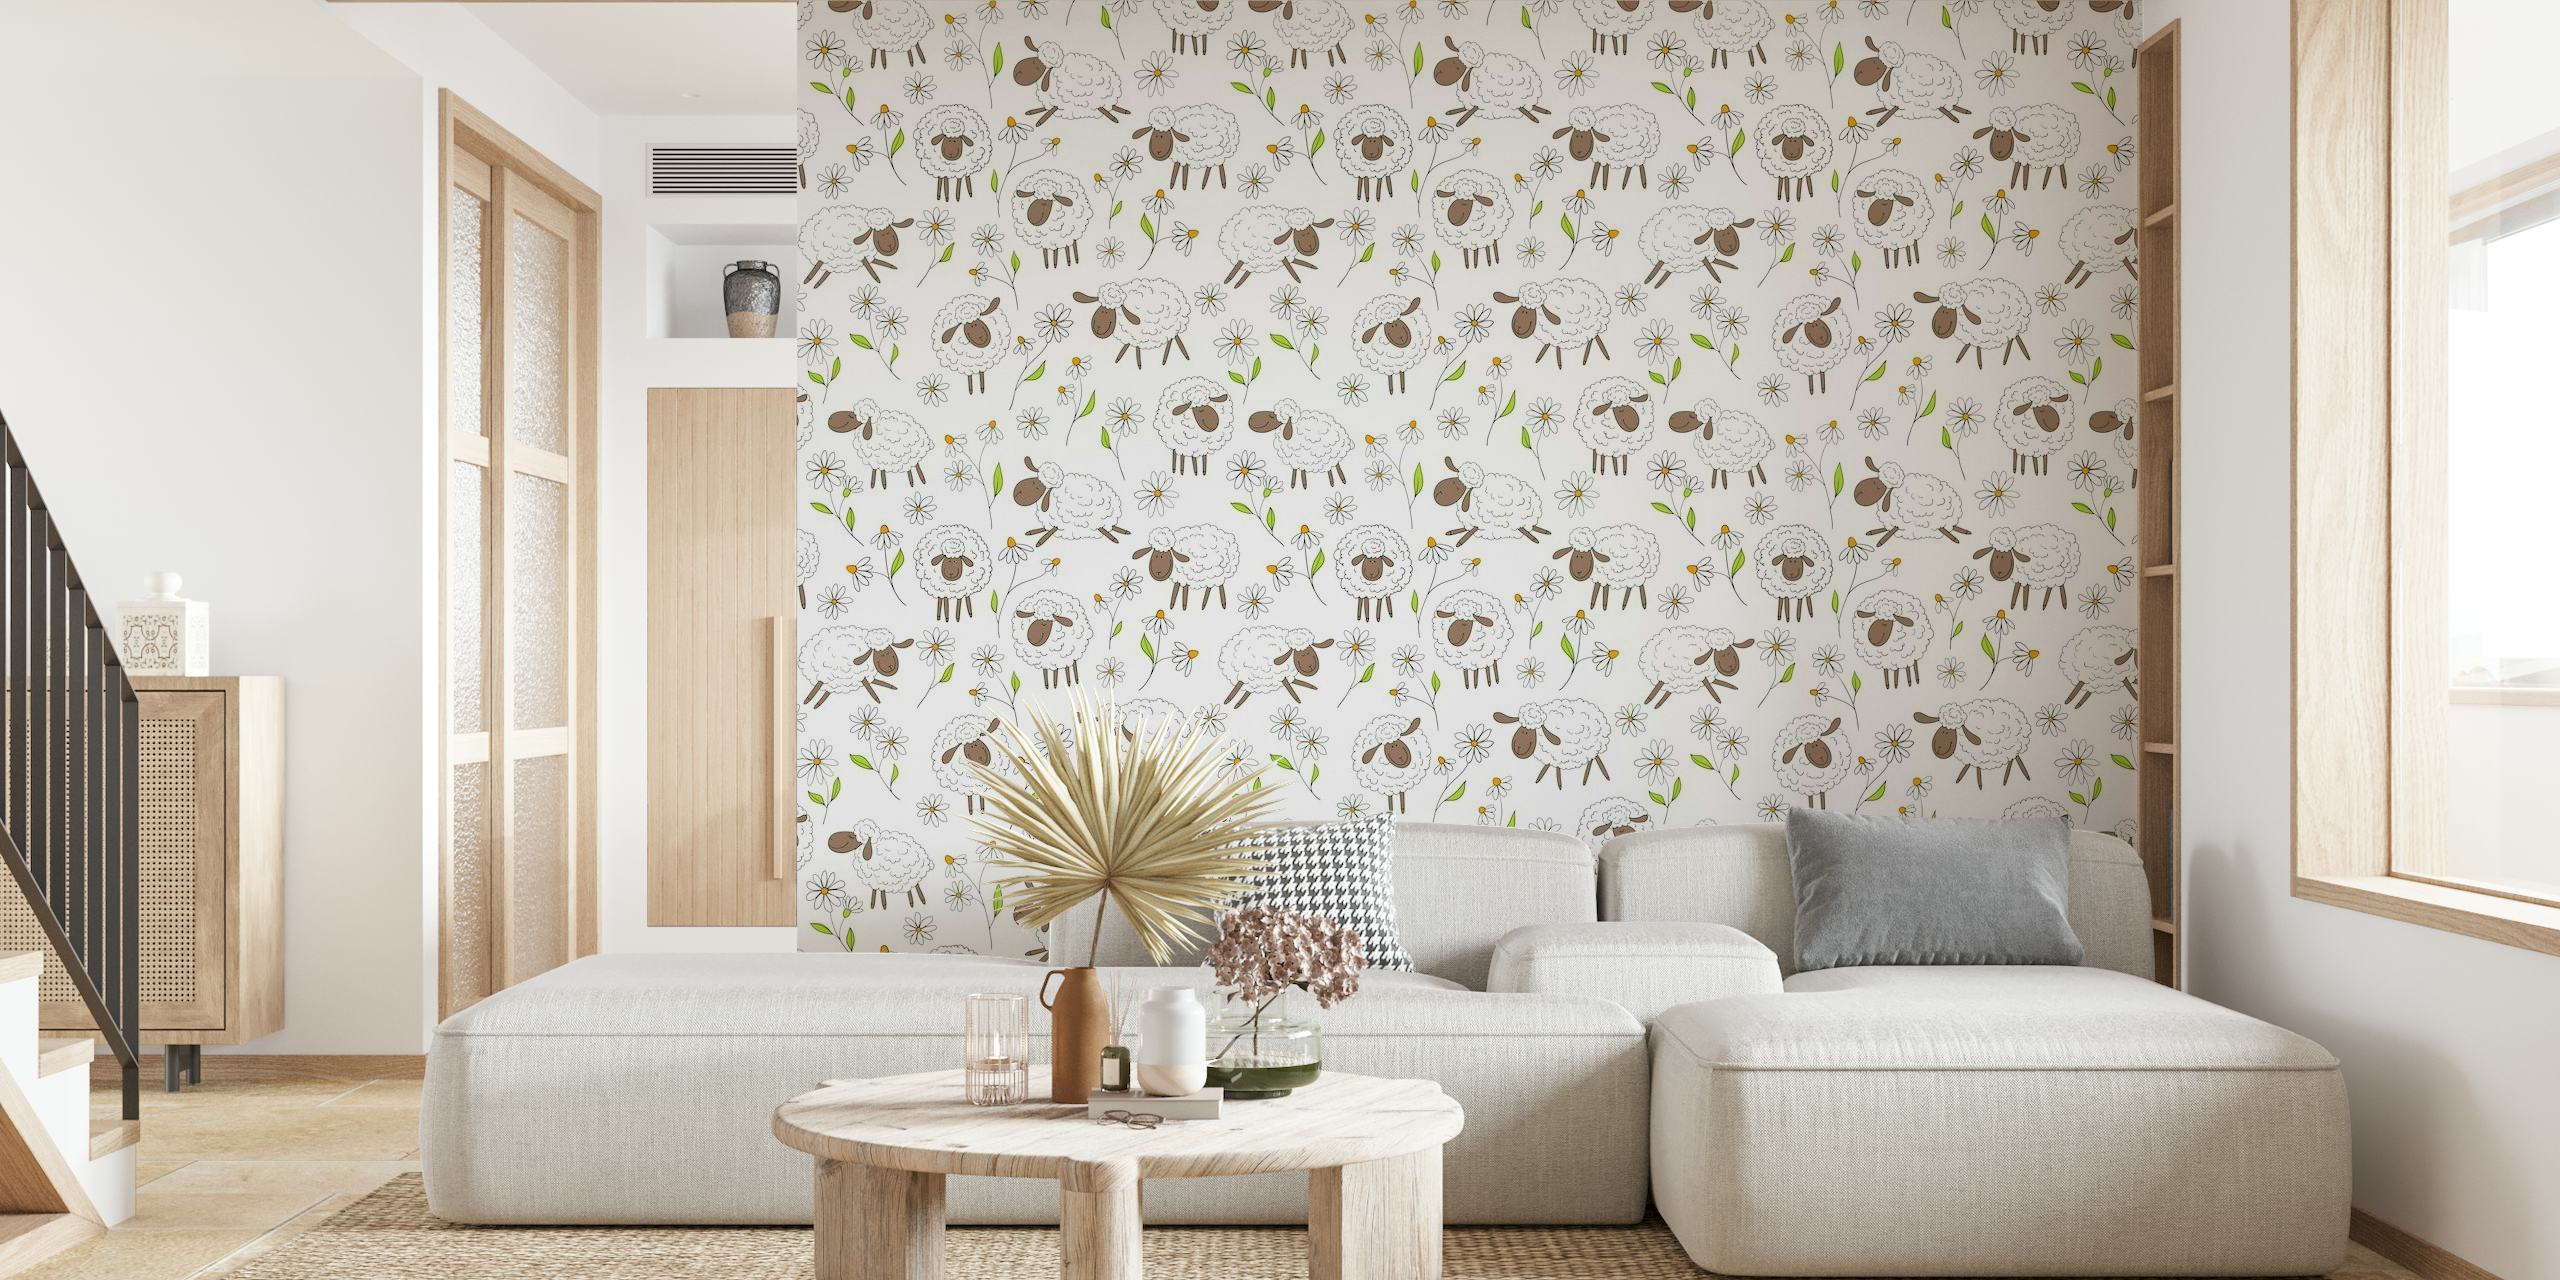 Counting sheep on white wallpaper